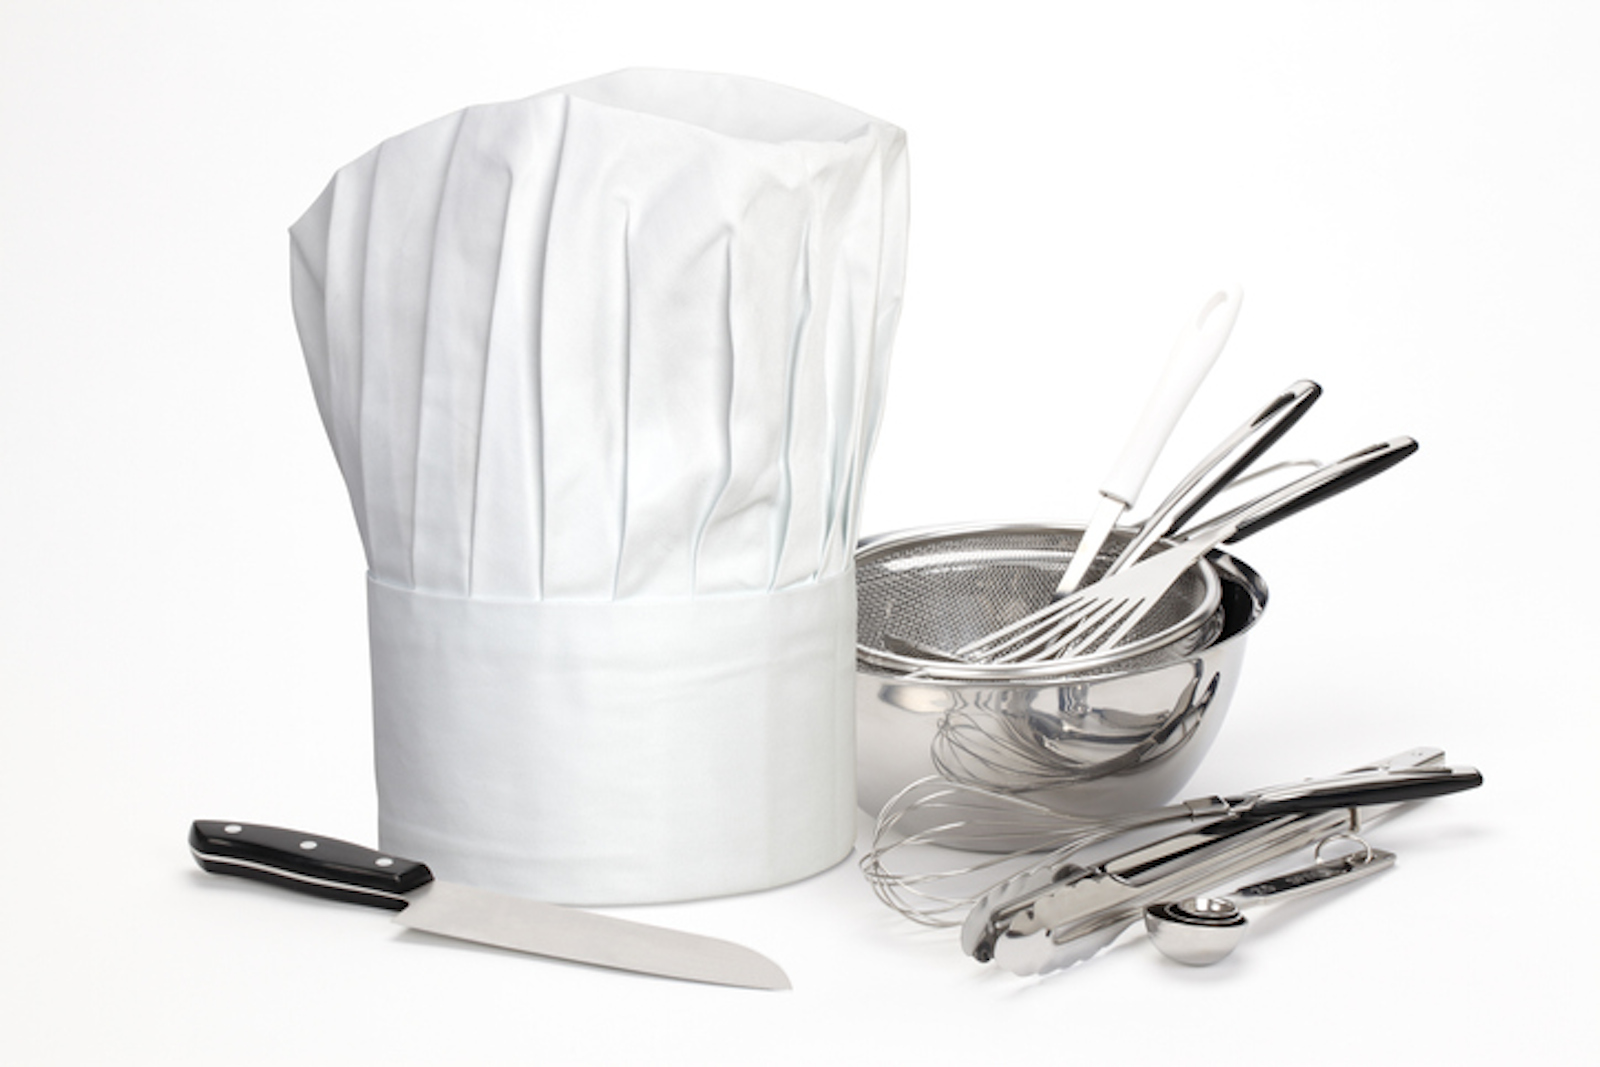 The perfect kit to give away to aspiring chefs at Christmas